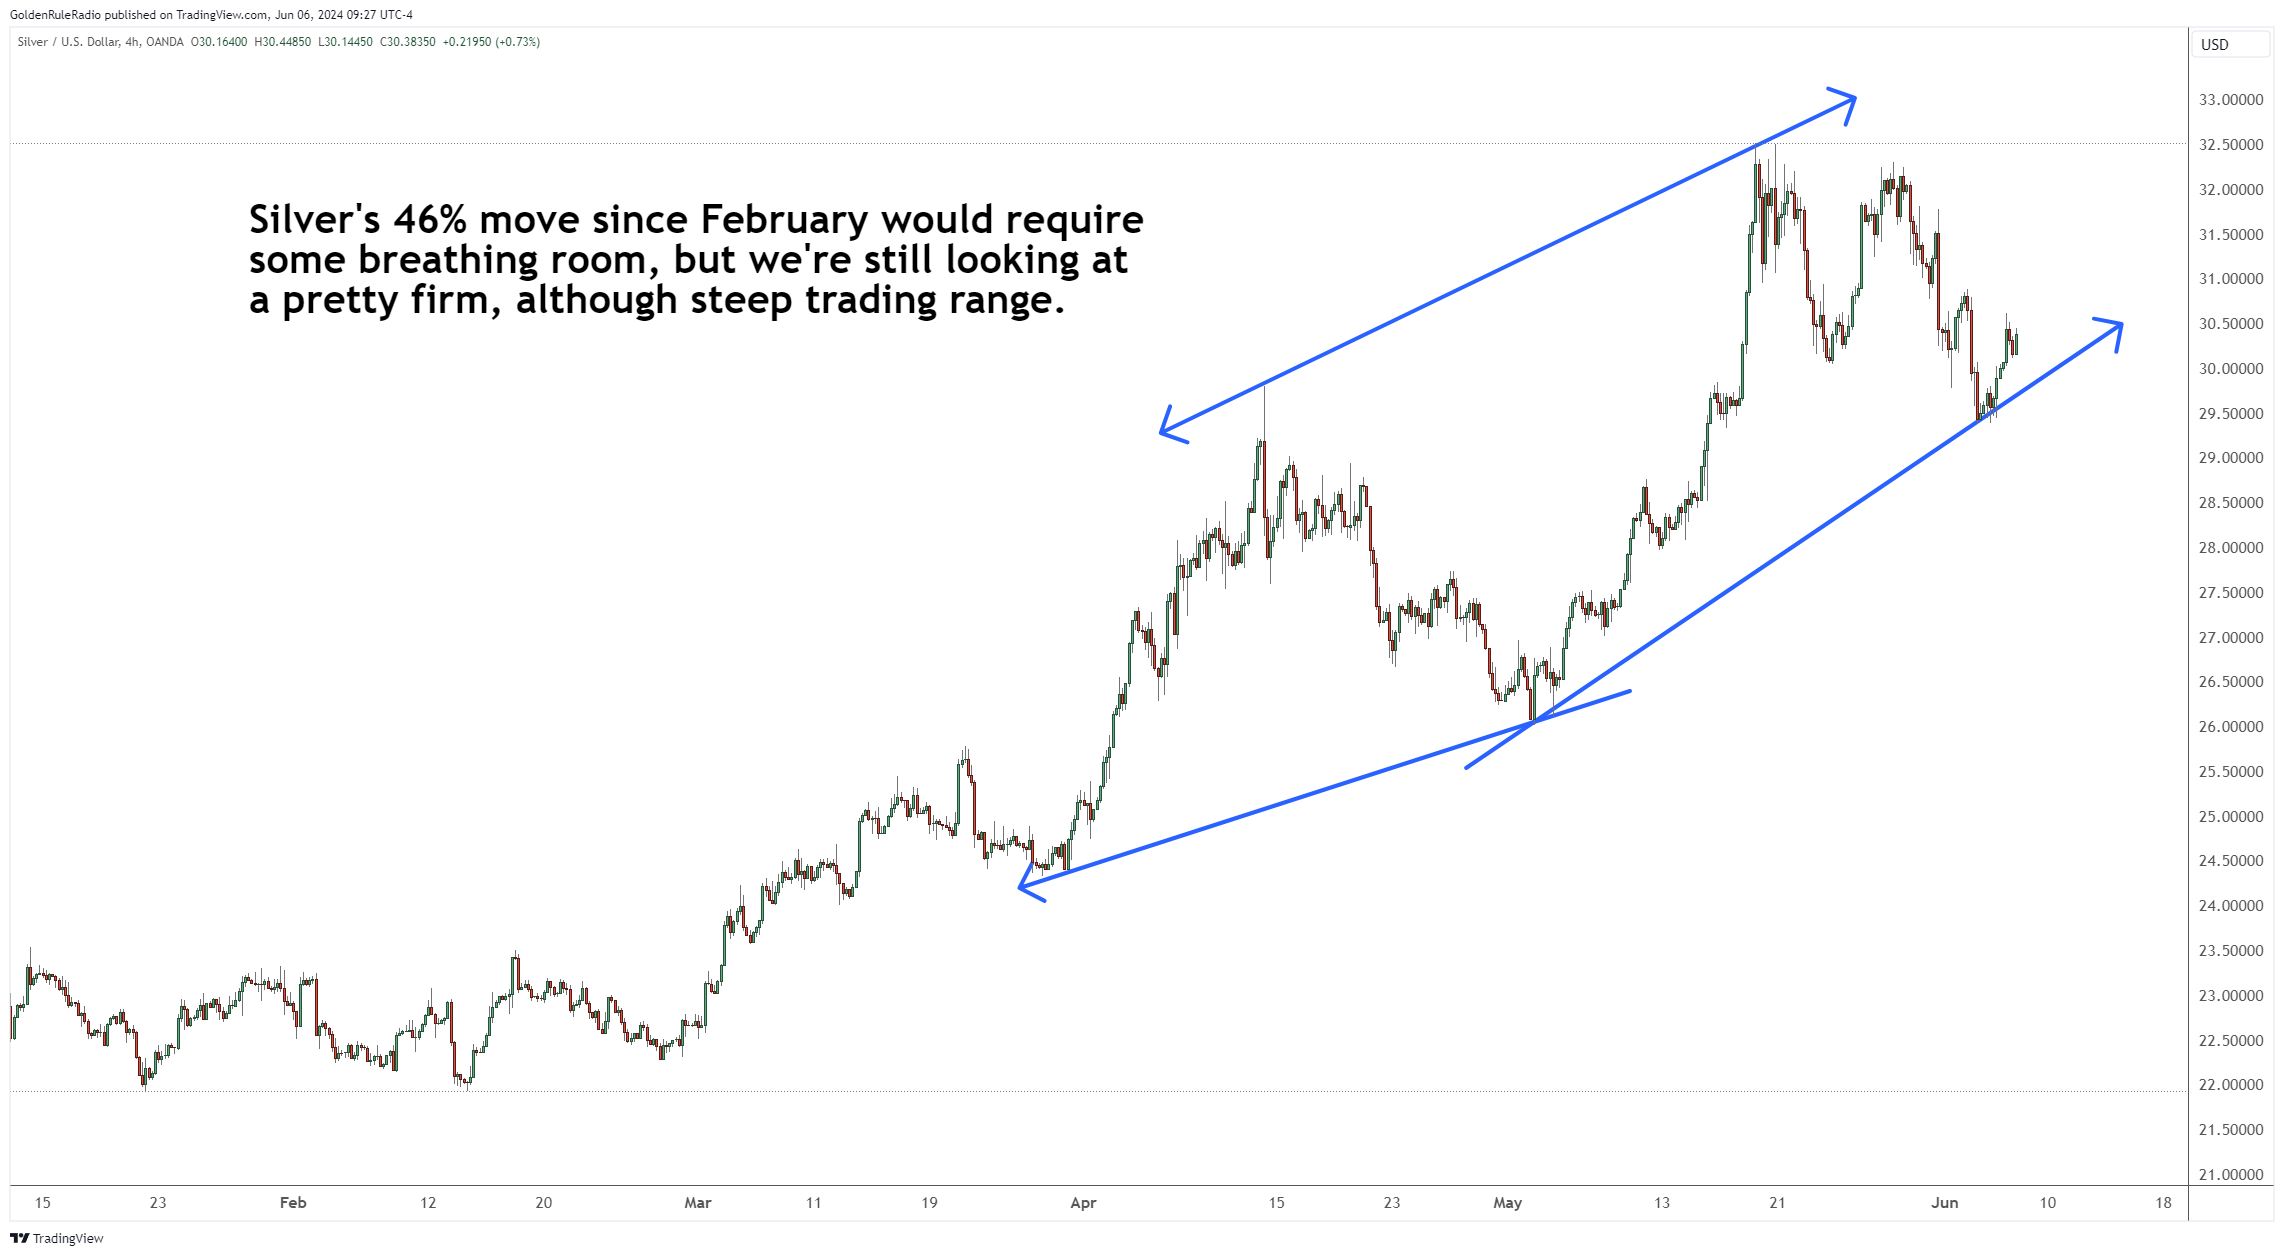 Silver’s 46% move since February would require some breathing room